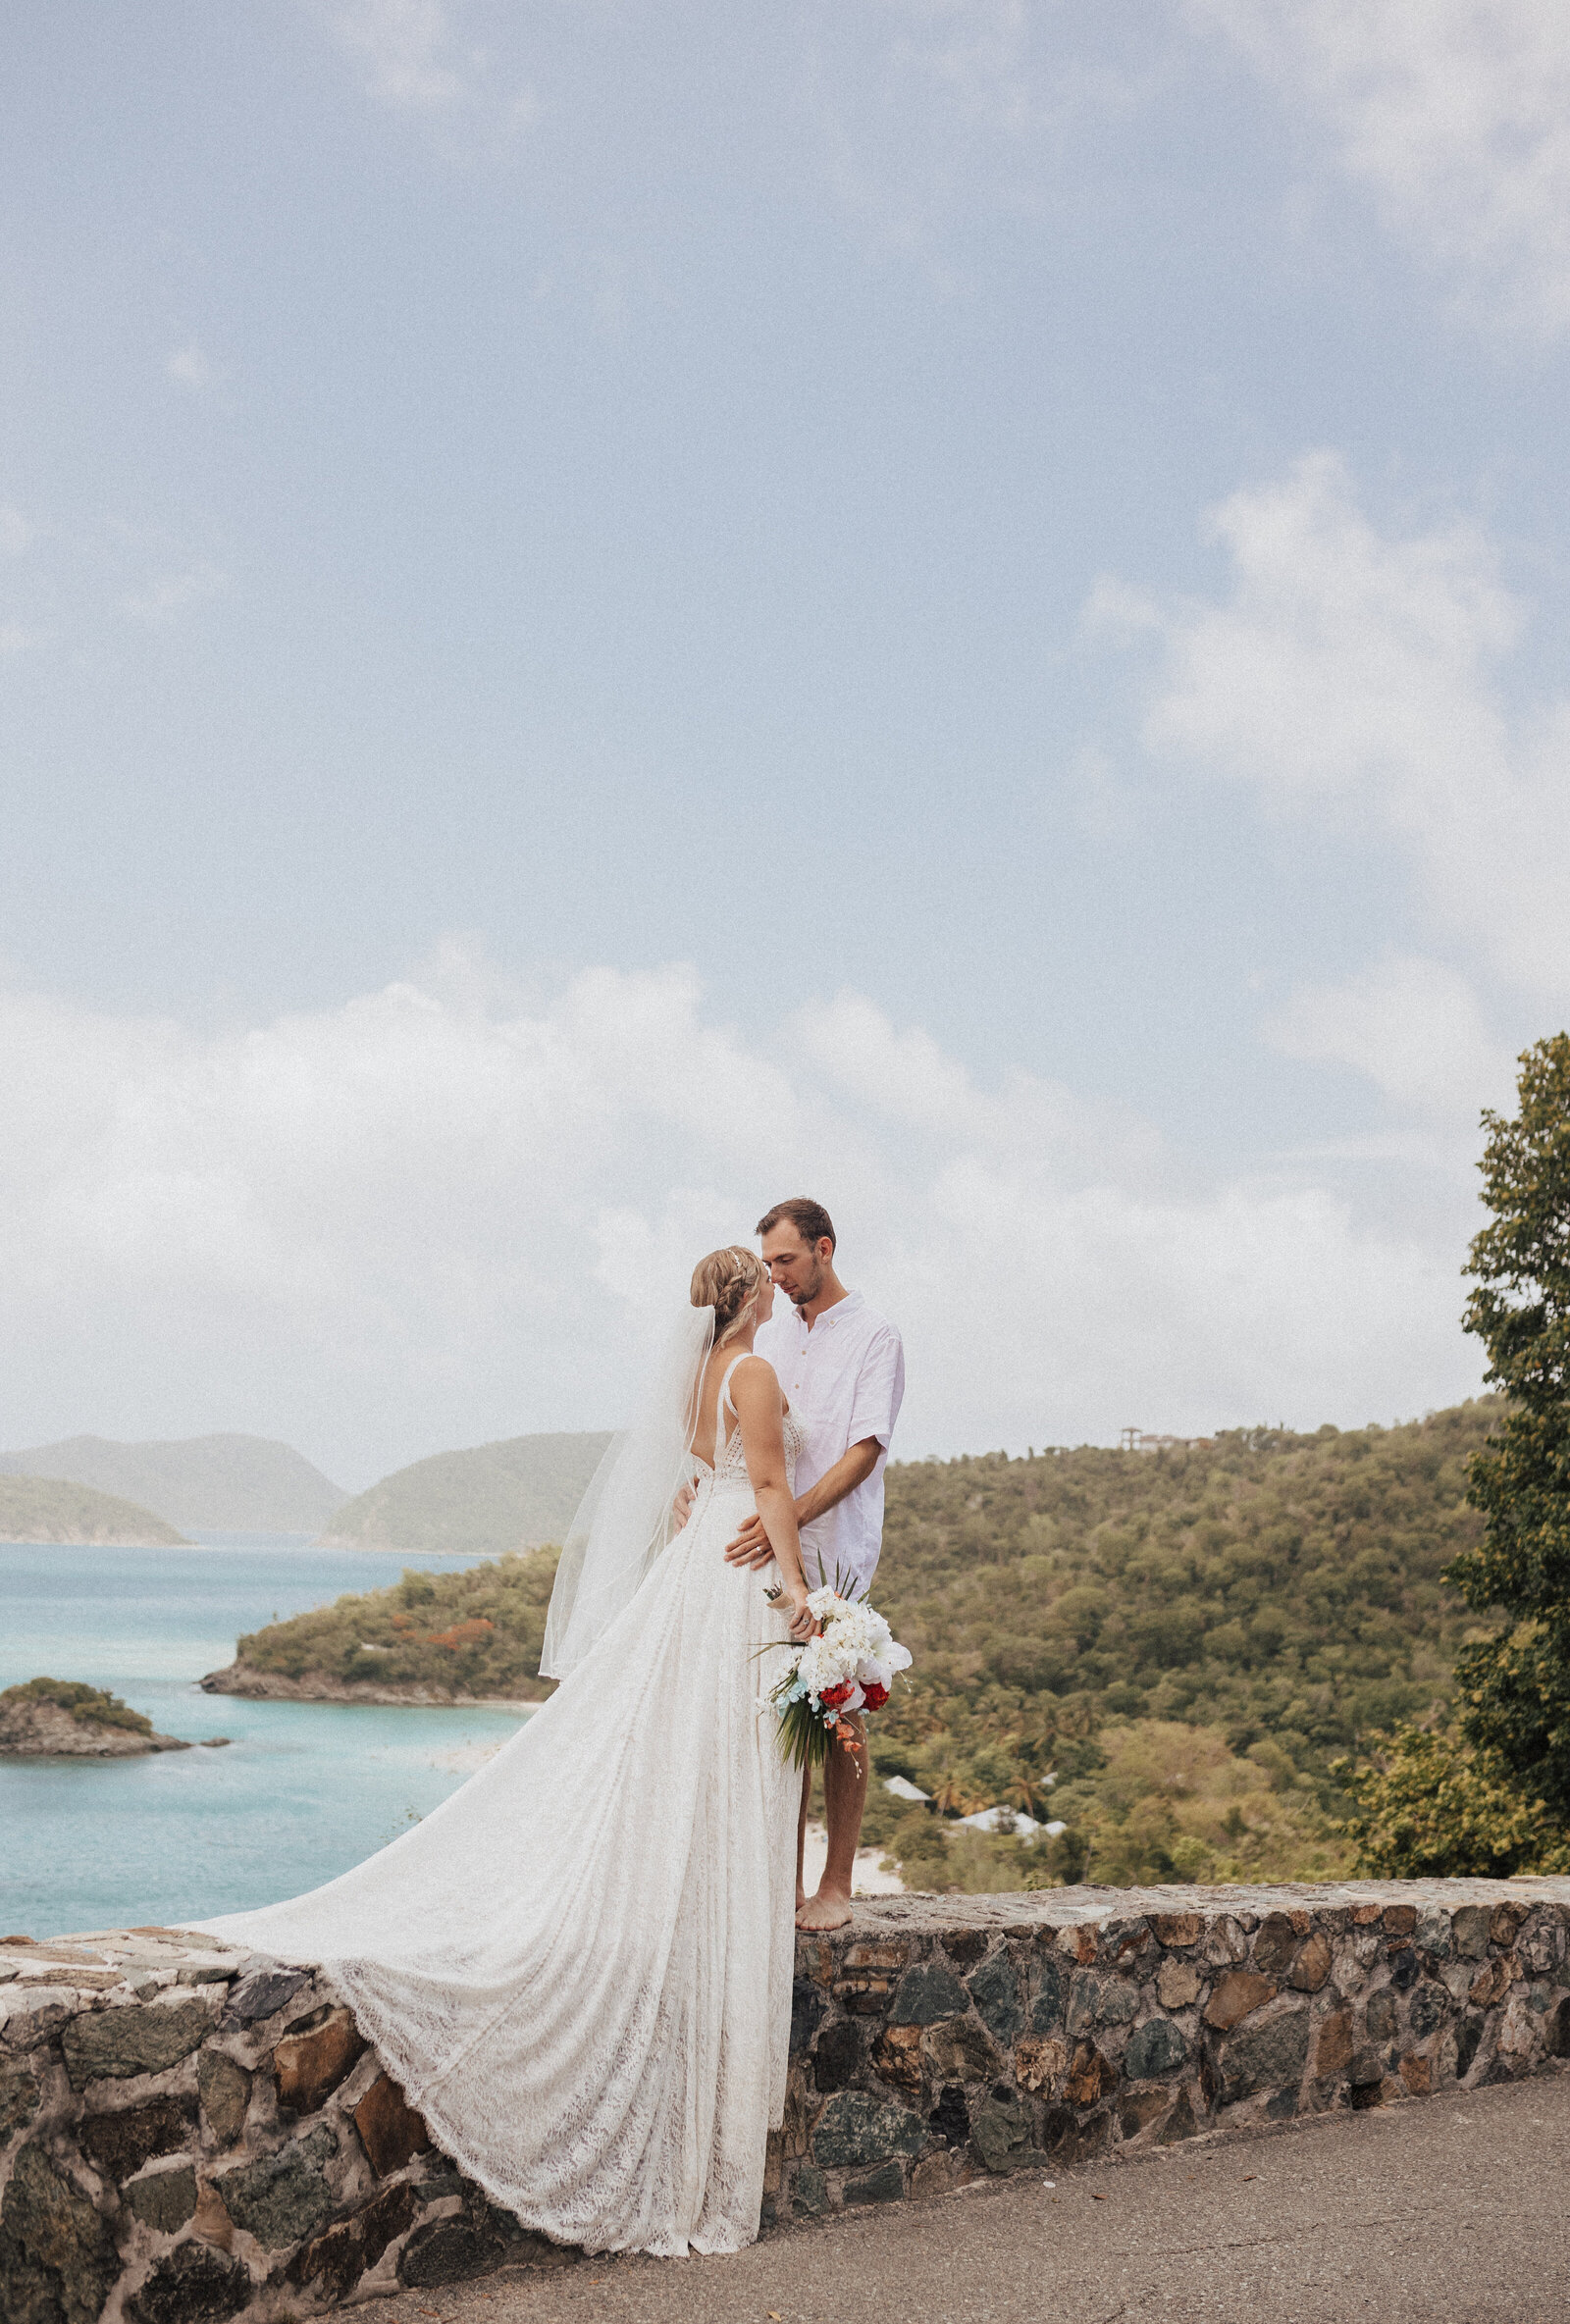 Intimate elopement on the beaches of St John surrounded by their closest family and friends